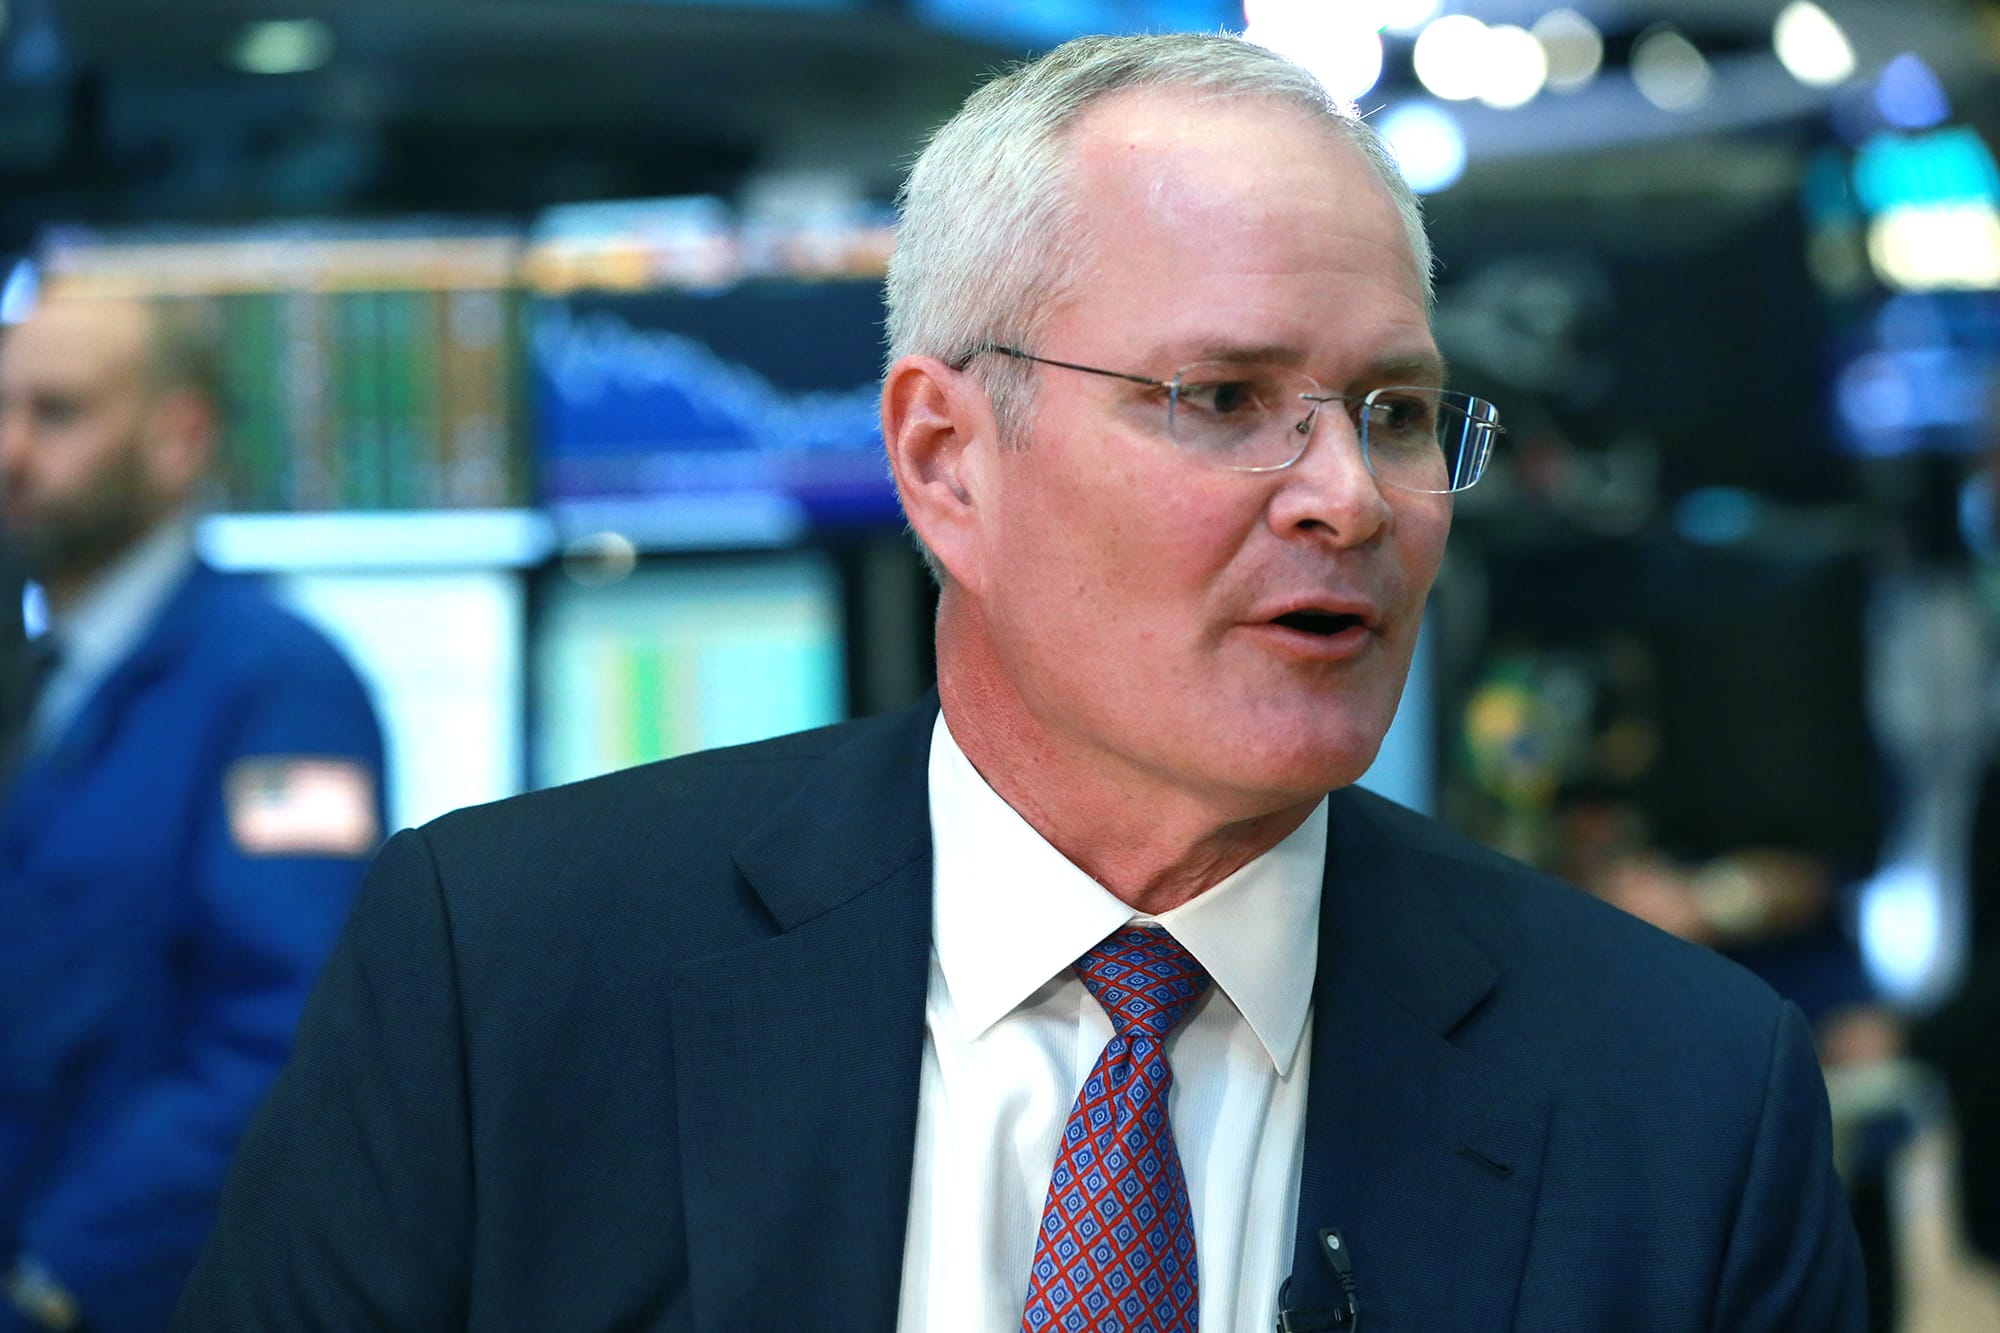 Exxon CEO Darren Woods promises a strong dividend despite losses in 2020